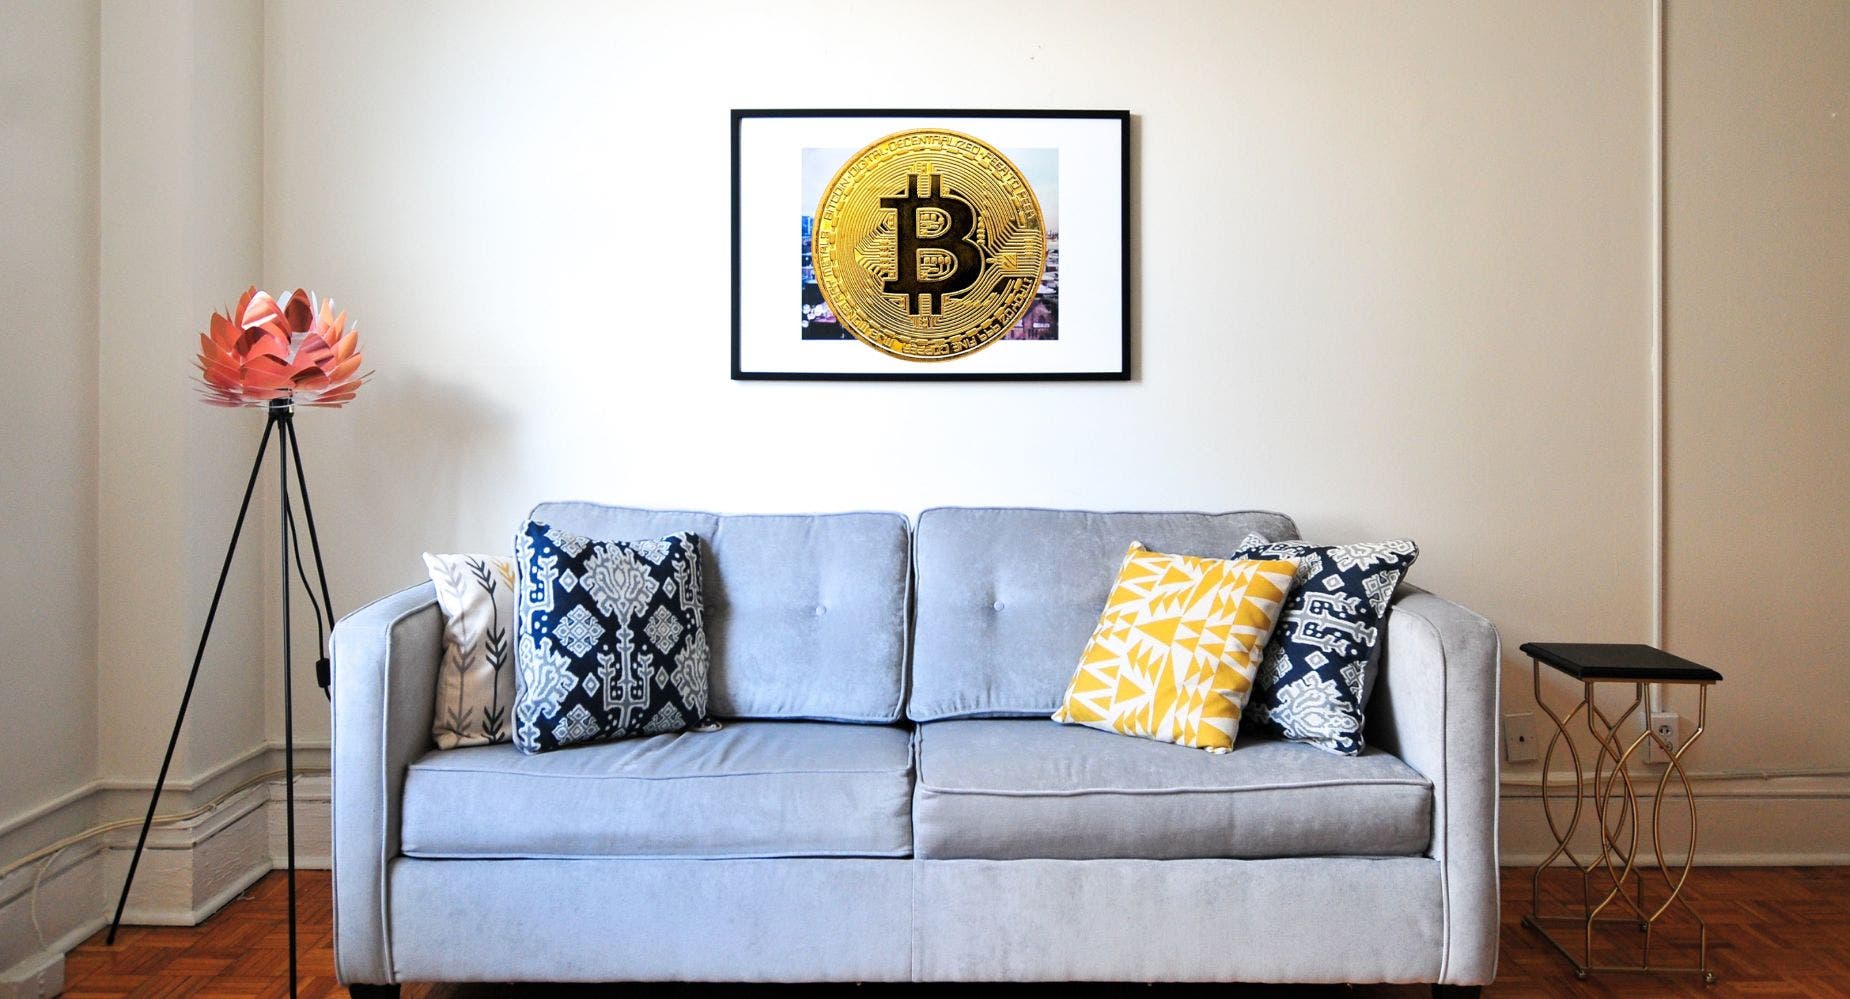 Crypto House With Bitcoin, Ethereum, Dogecoin And Bored Ape Wallpaper Gets Price Cut: Here's How Much It Costs Now